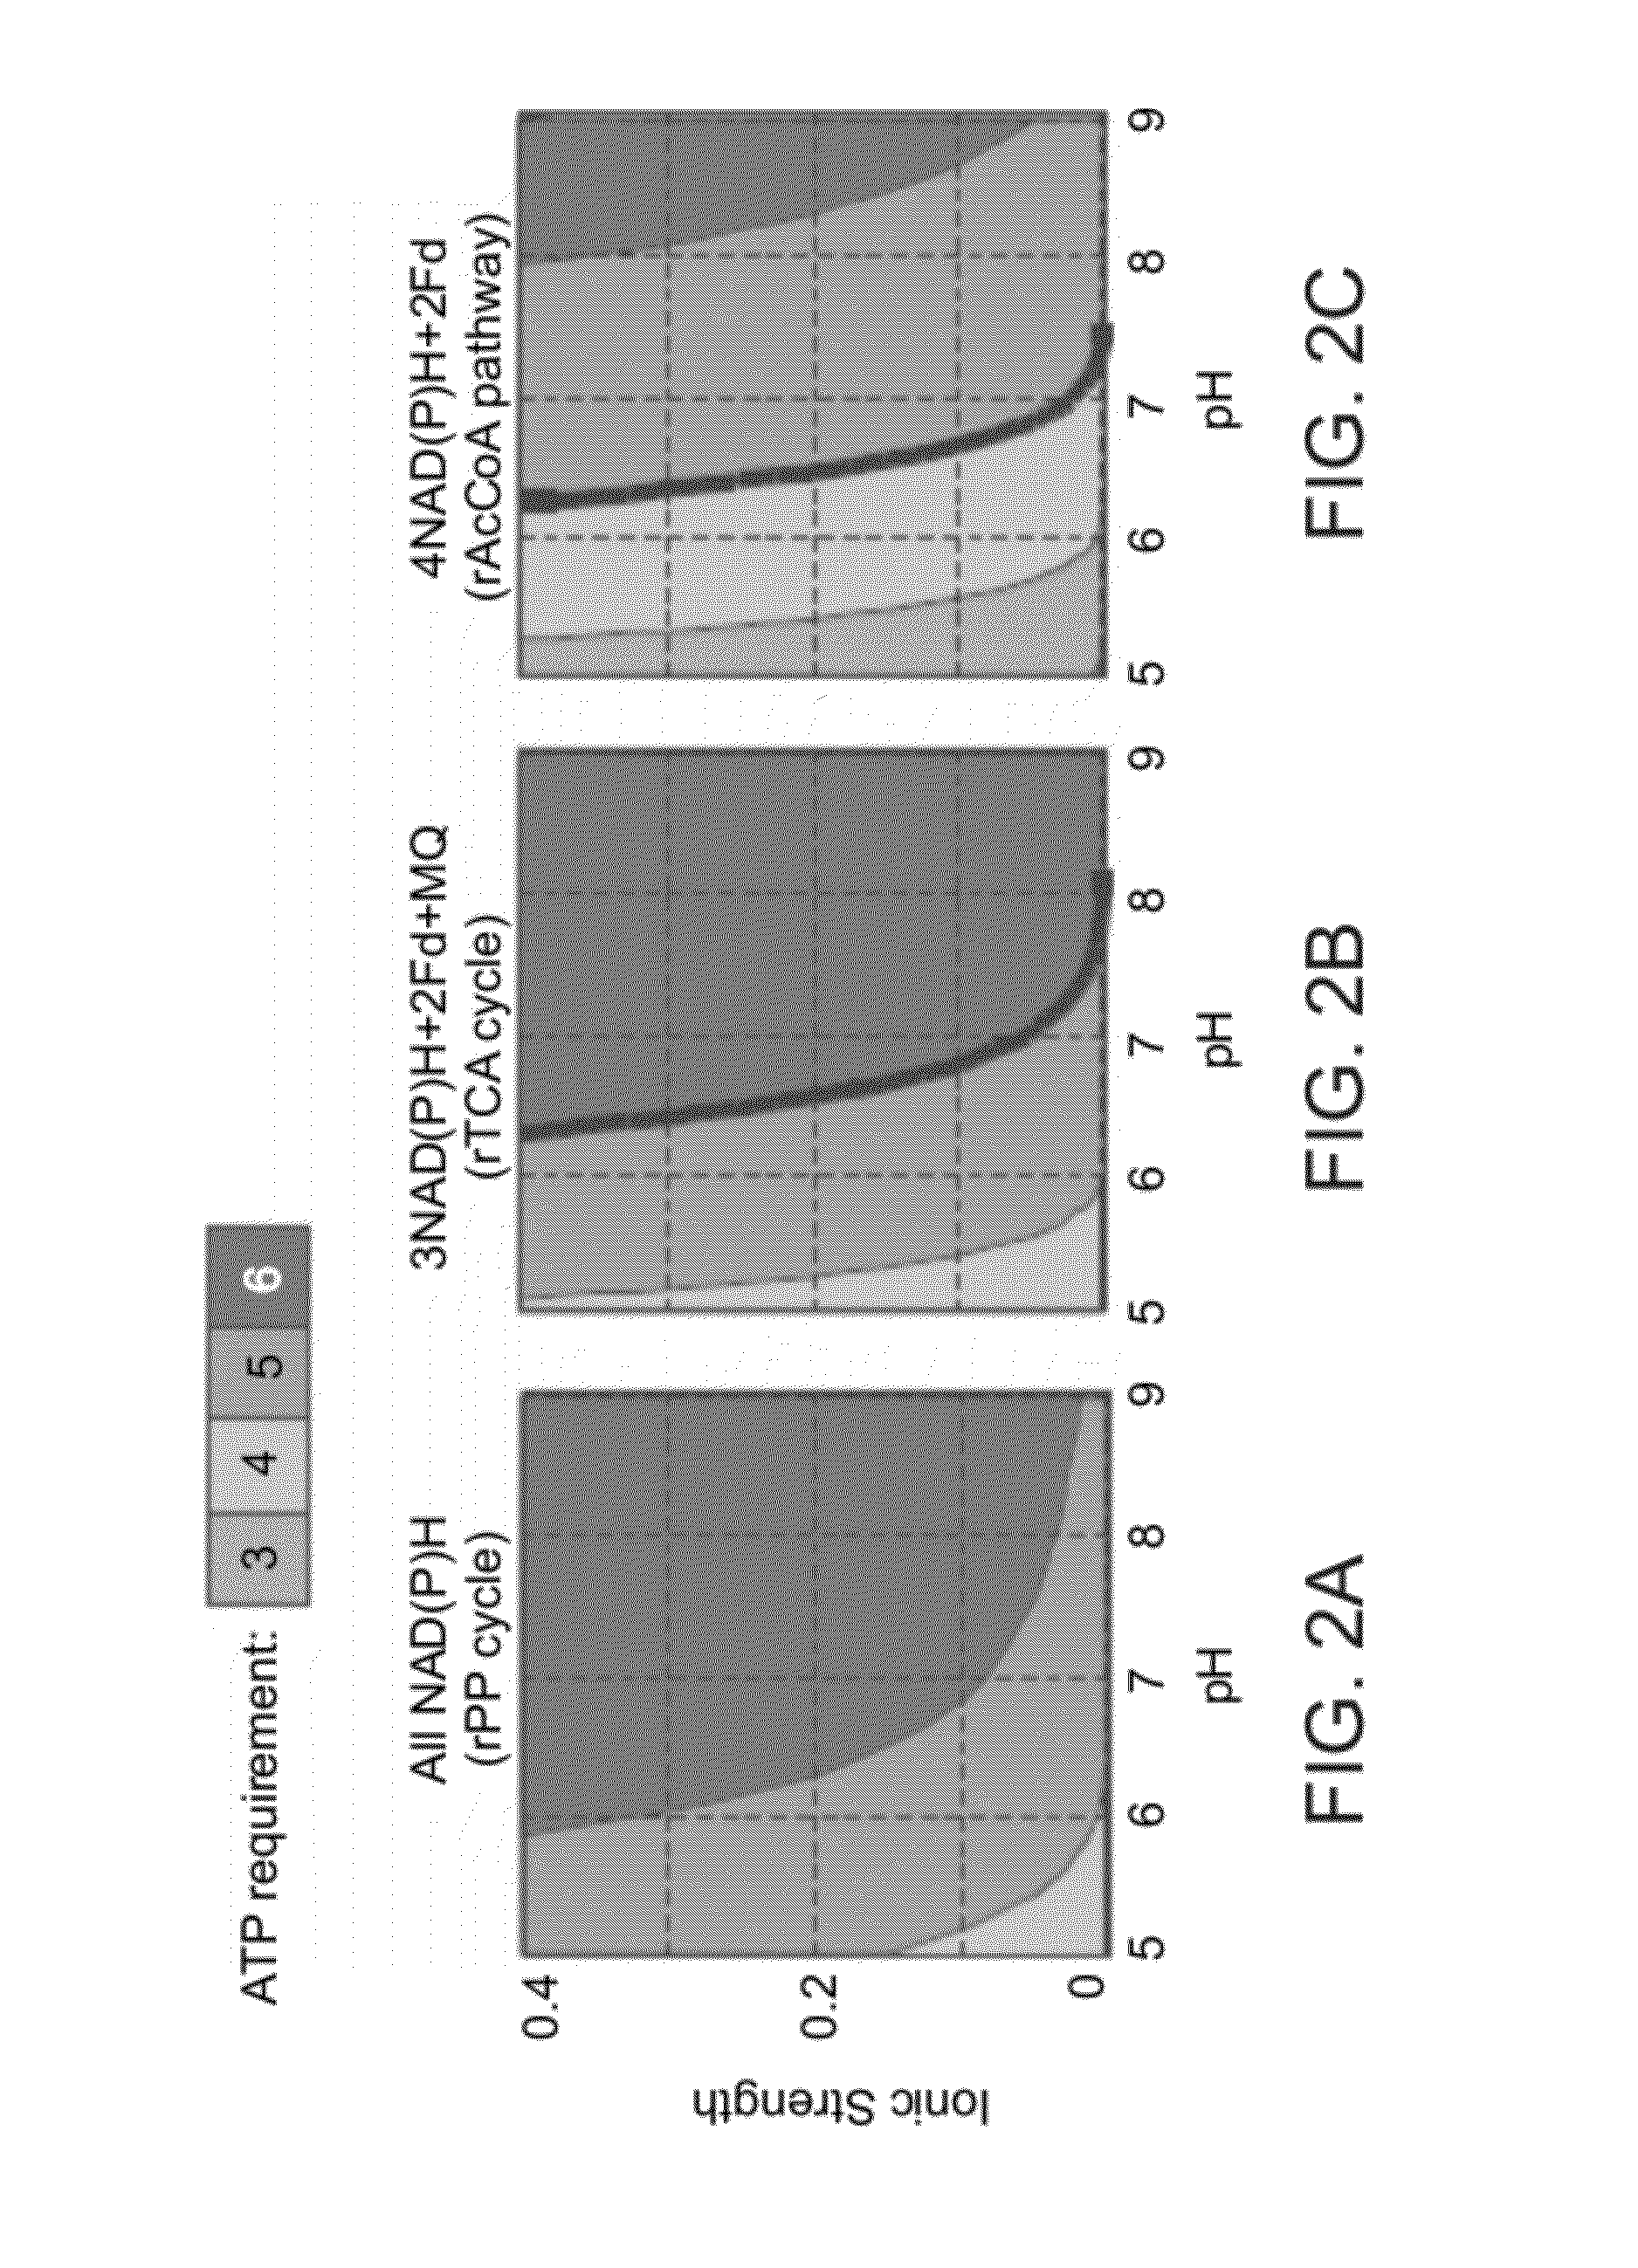 Enzymatic systems for carbon fixation and methods of generating same